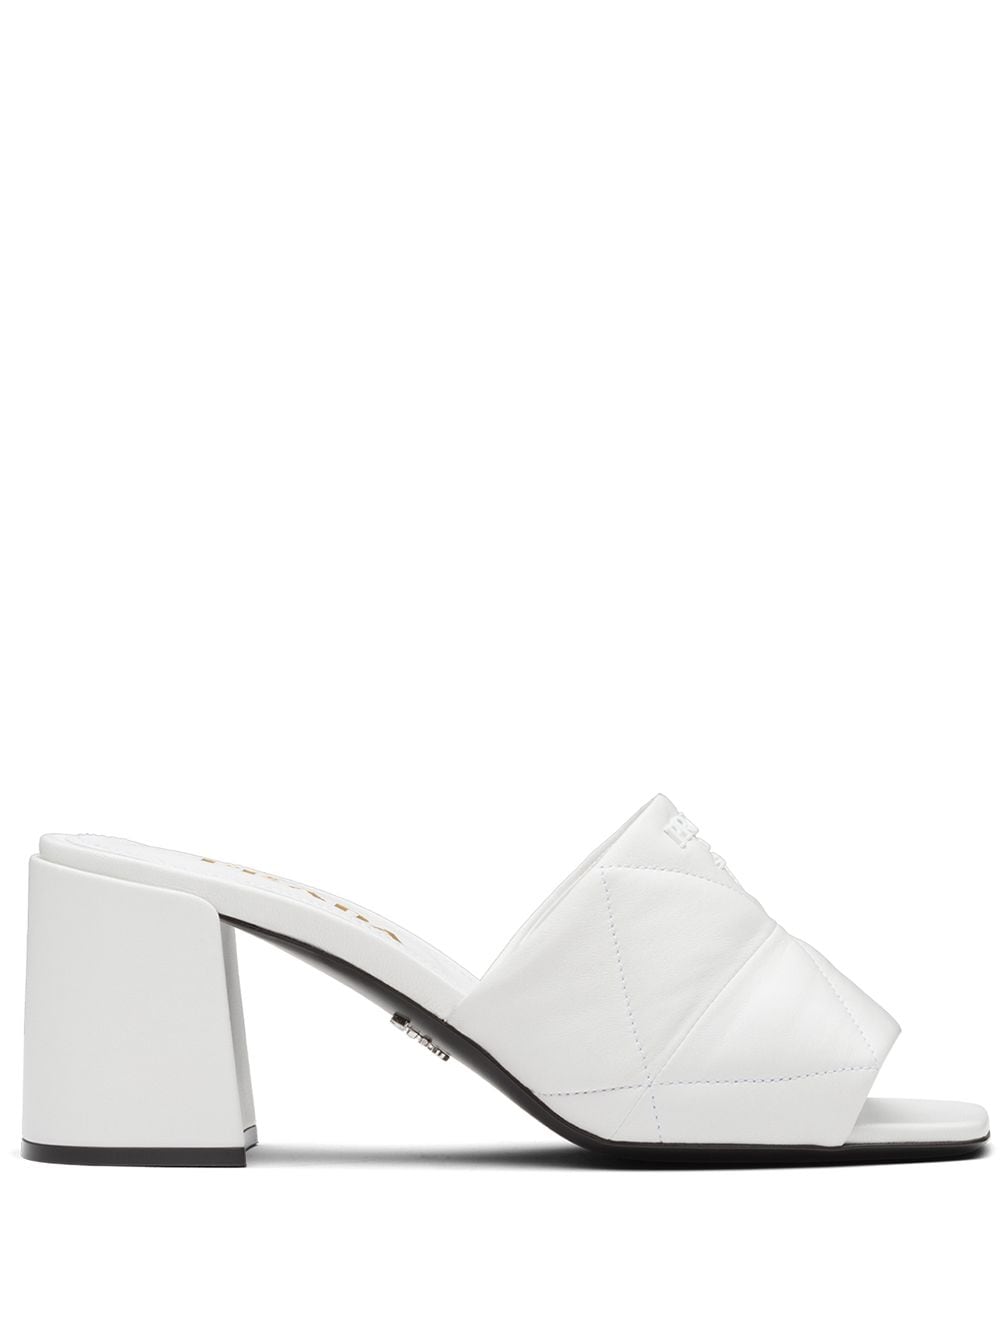 Prada logo-lettering quilted sandals - White